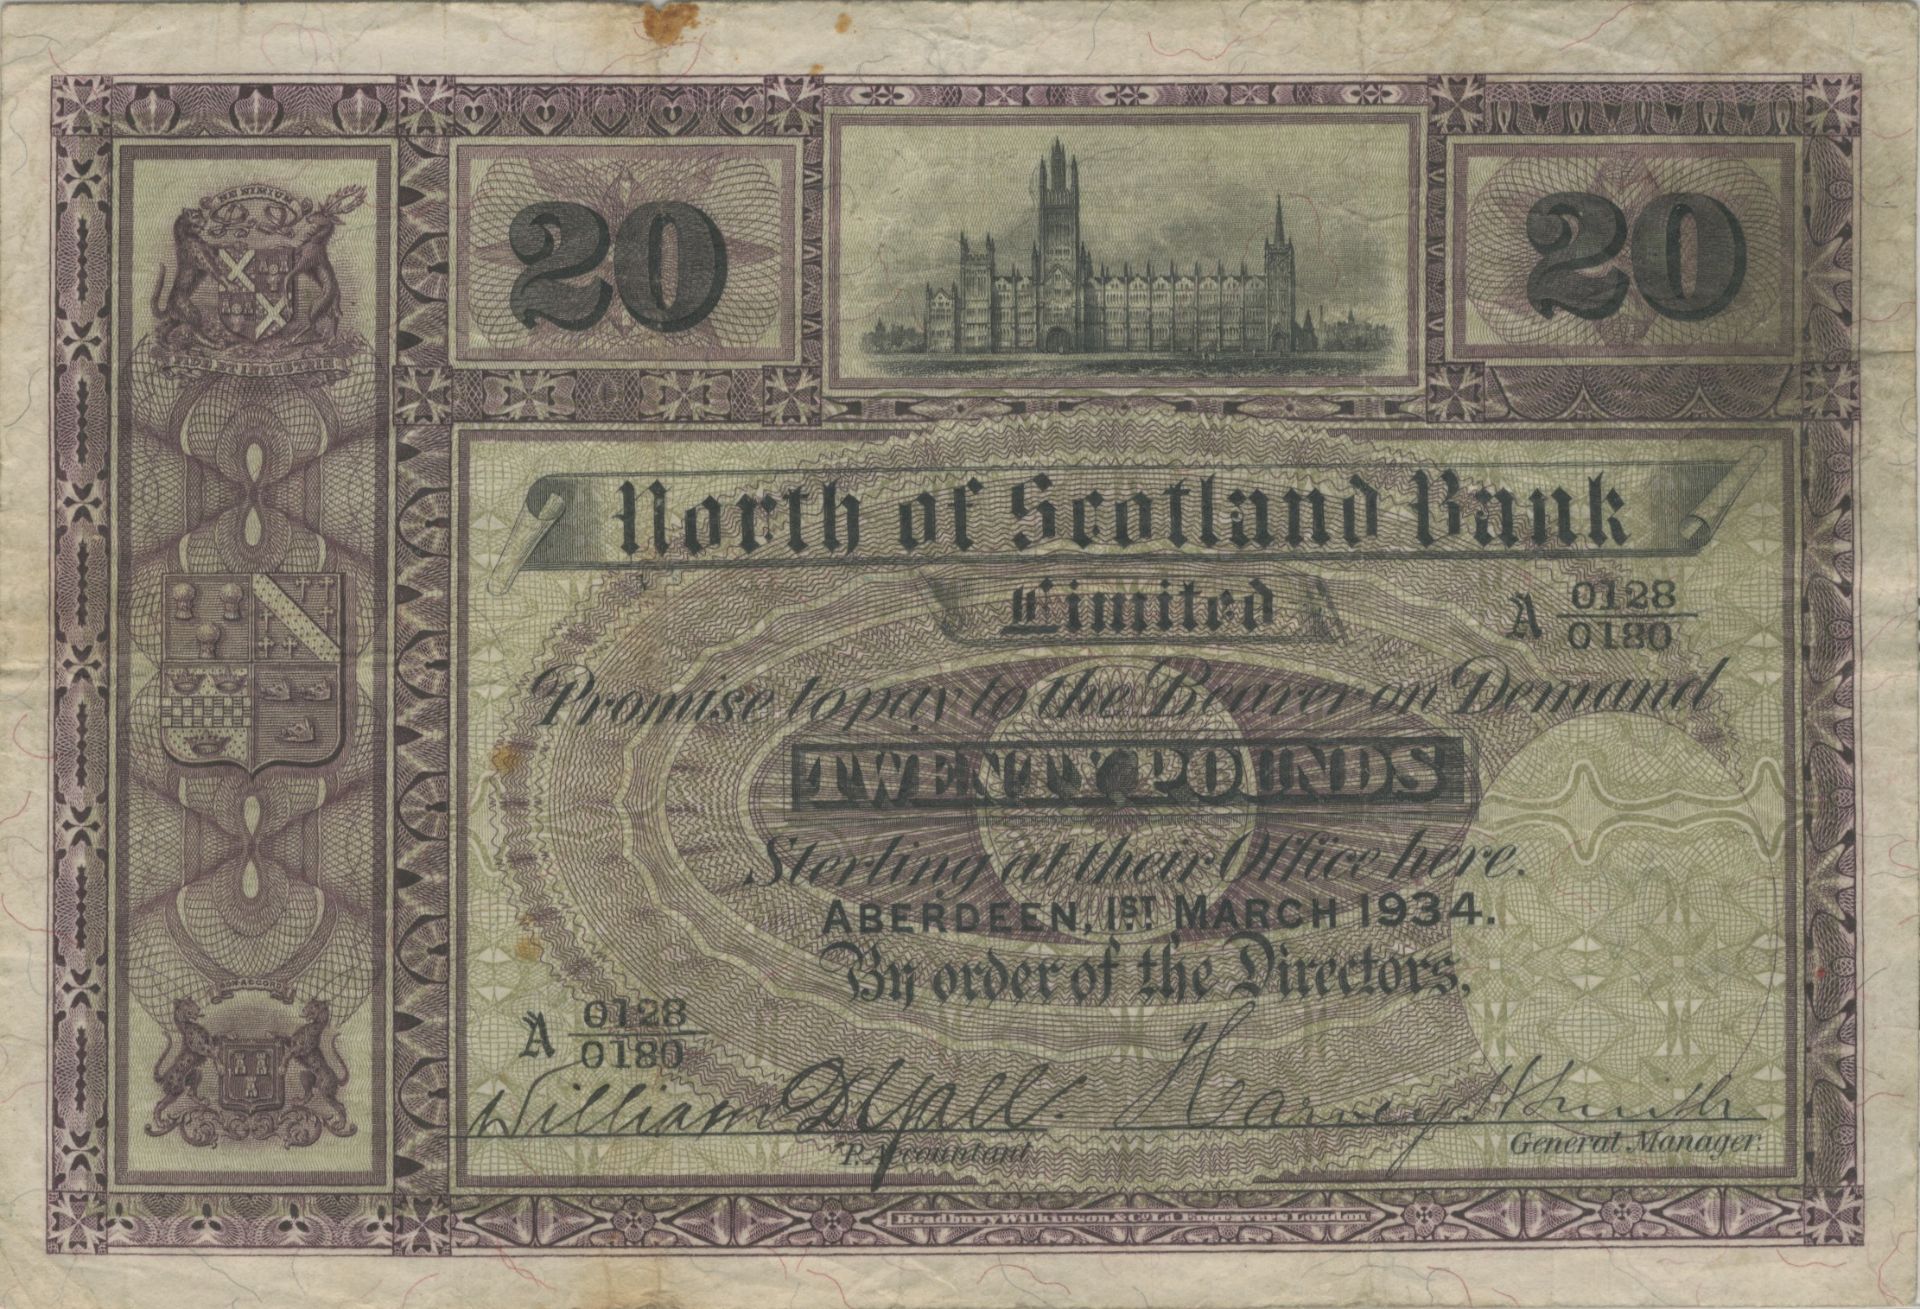 The North of Scotland Bank Limited, (1)